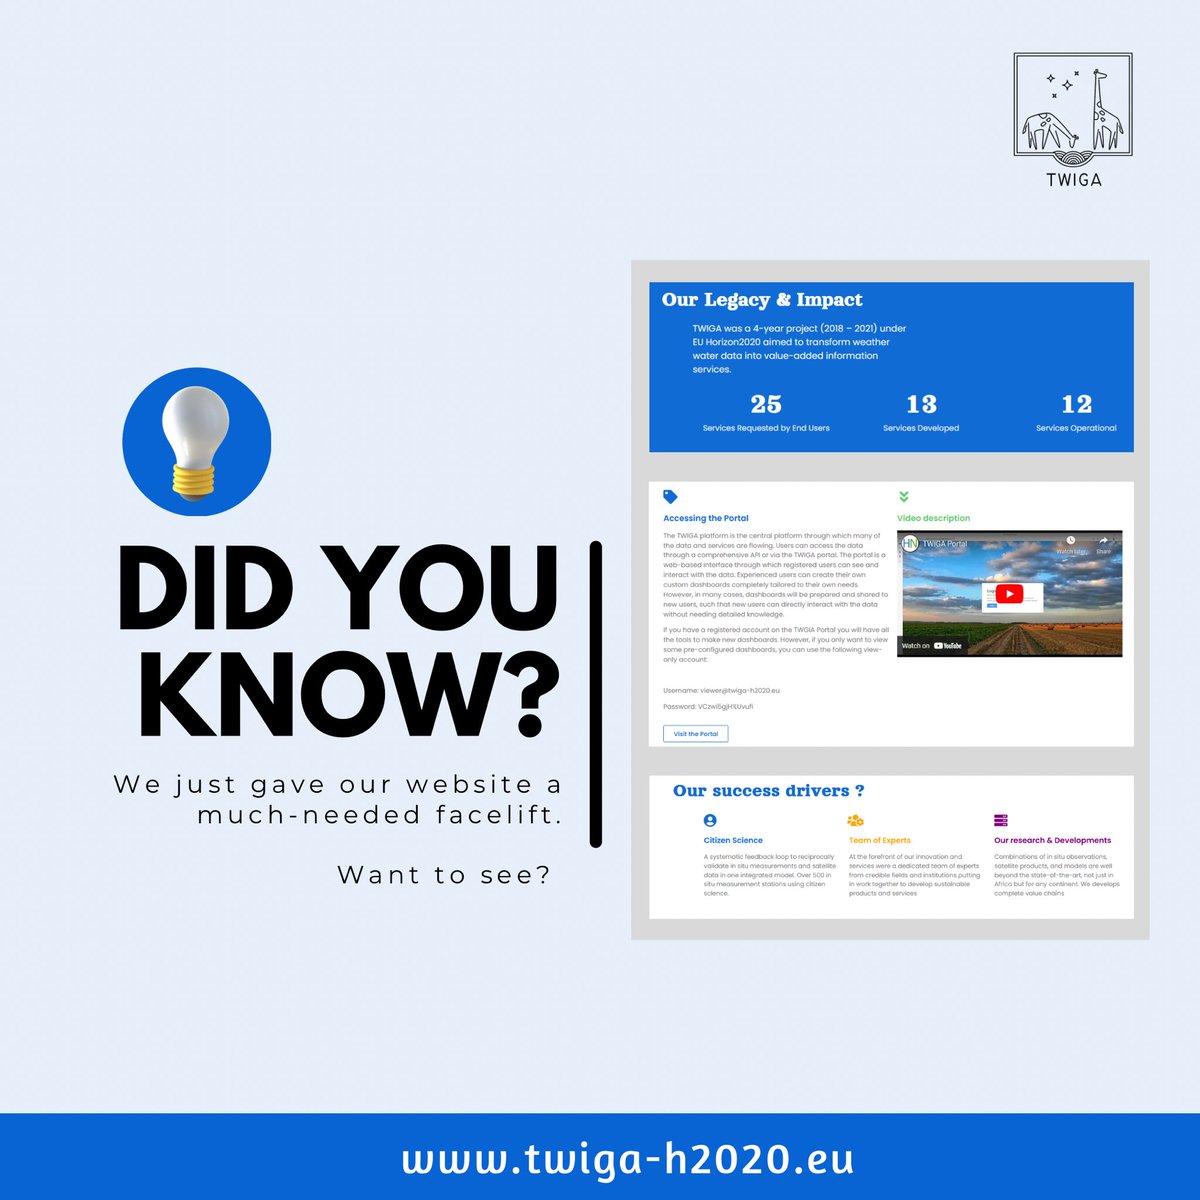 We have our website a facelift. Visit twiga-h2020.eu to have a beautiful experience.